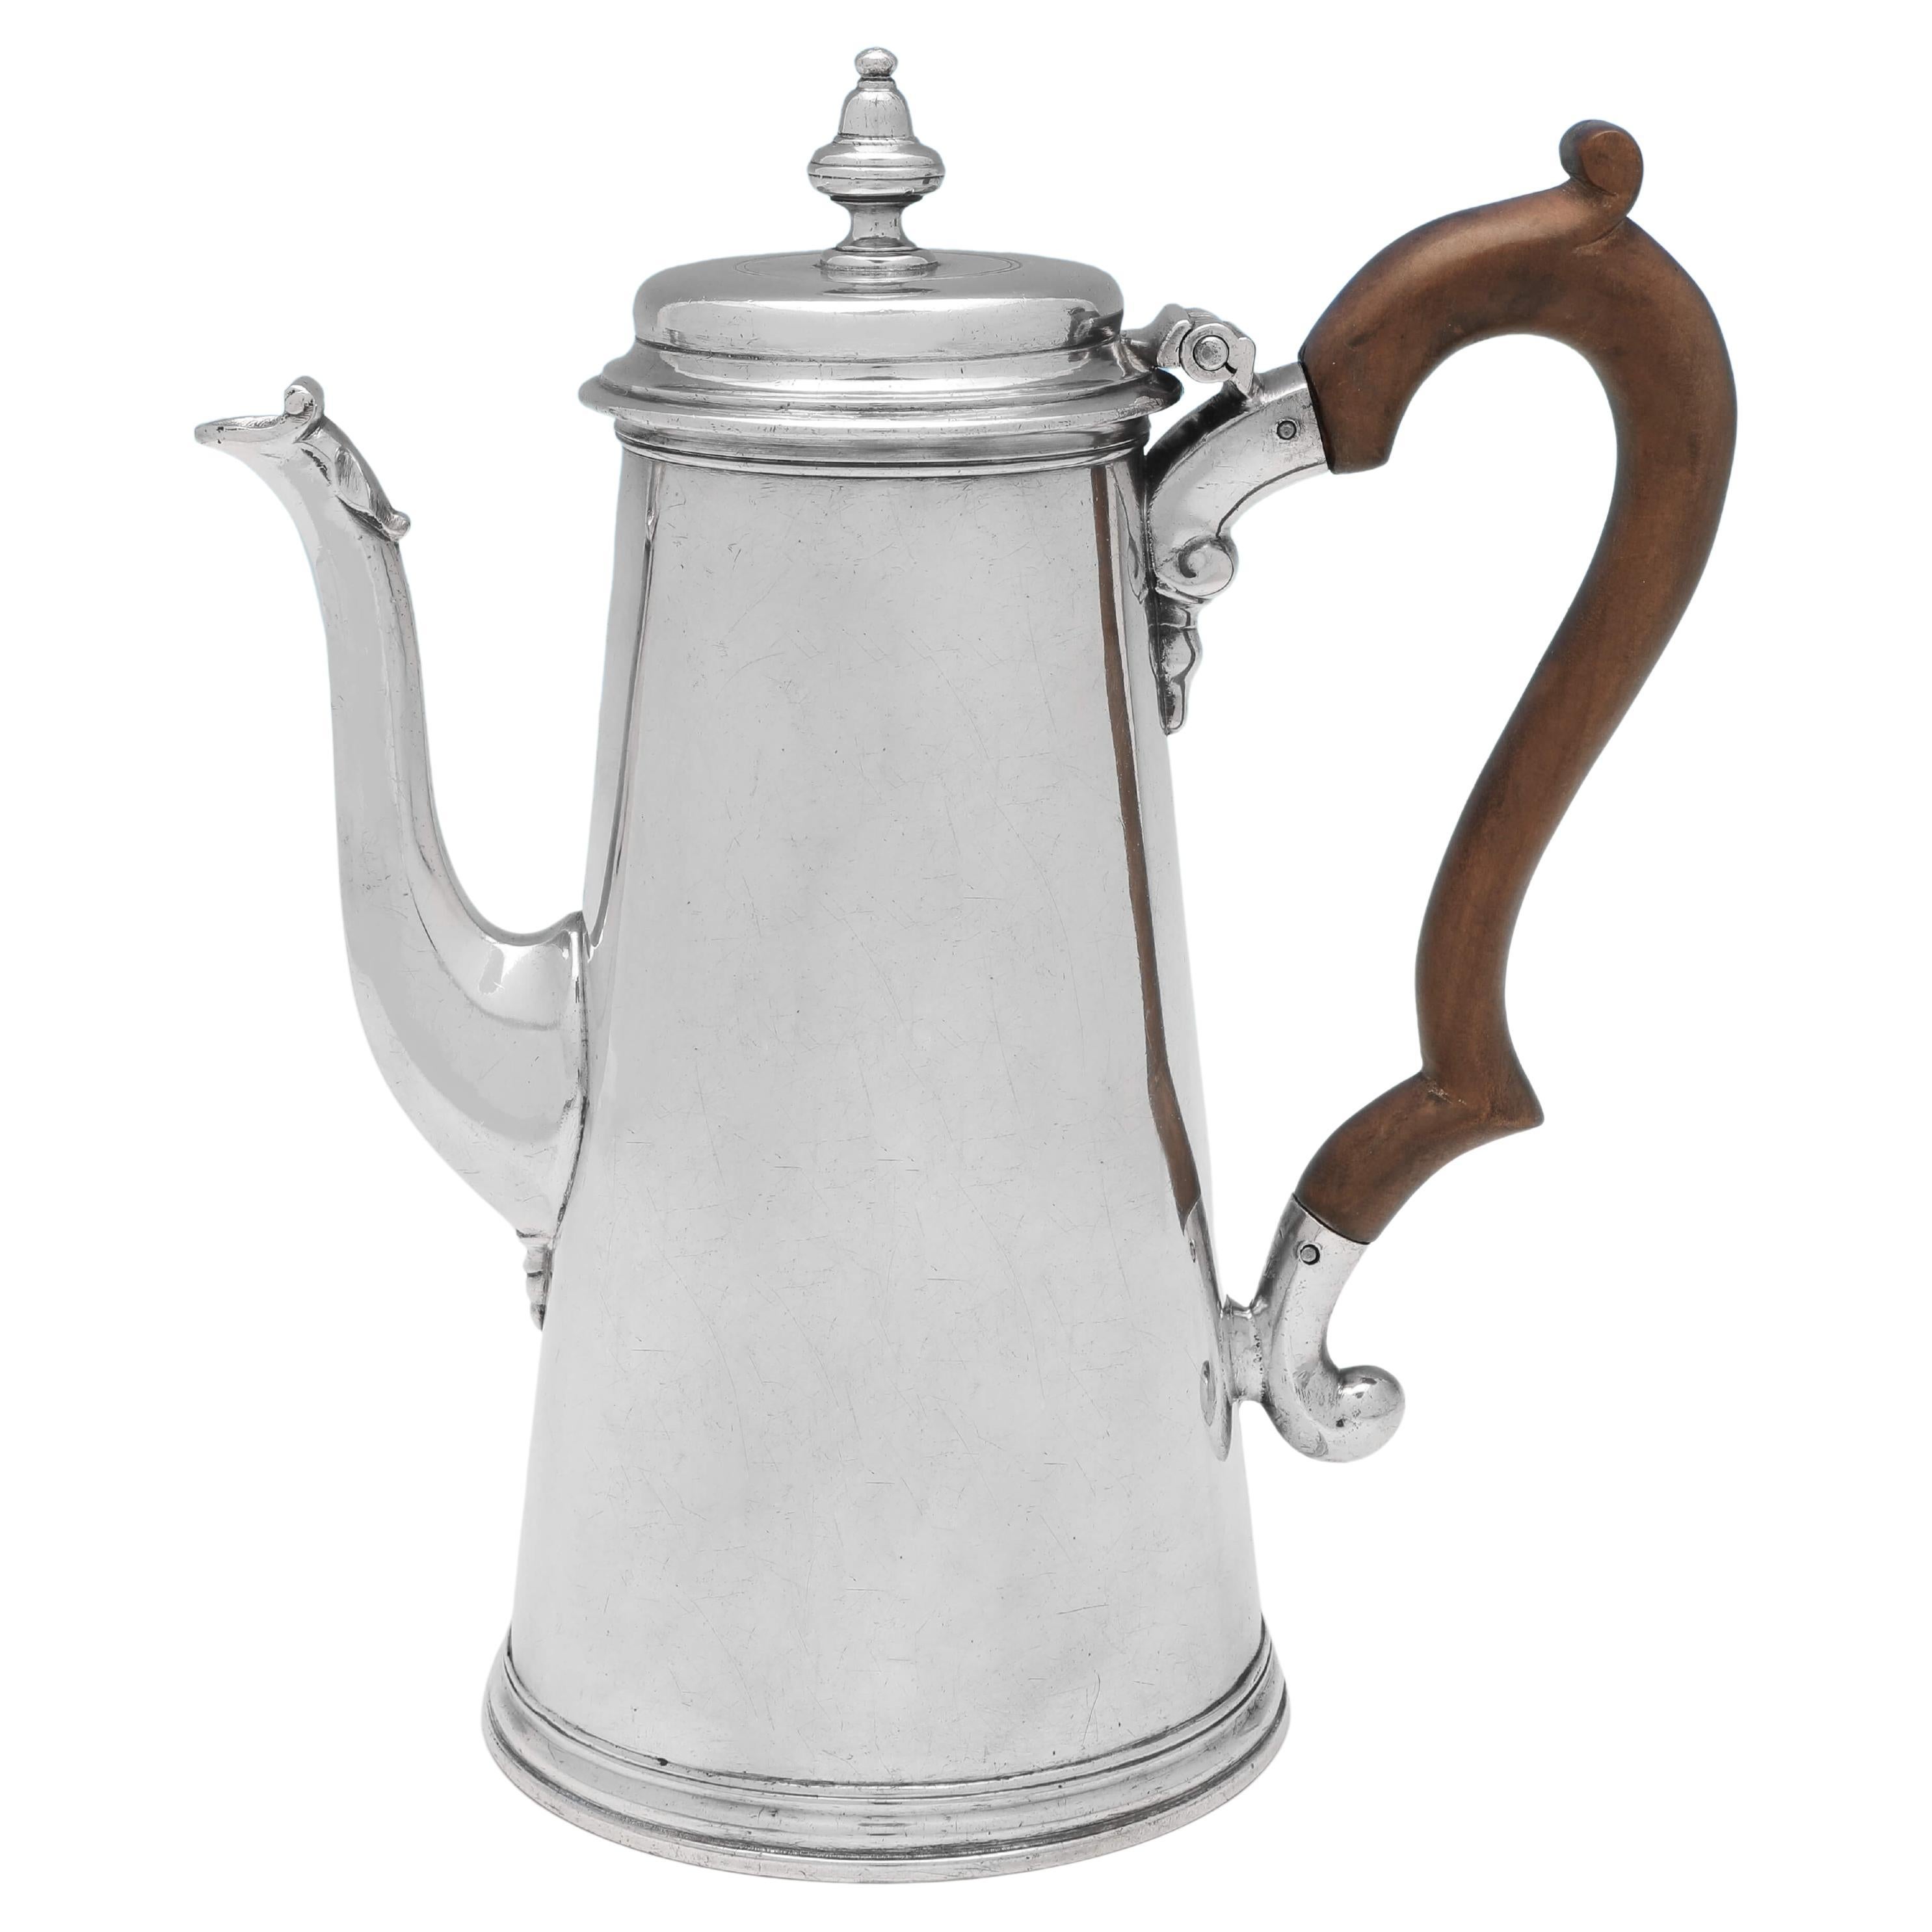 Hallmarked in London in 1730 by John Swift, this very handsome, George II, Antique Sterling Silver Coffee Pot, is straight sided, and features an armorial engraving to one side. The coffee pot measures 9.25